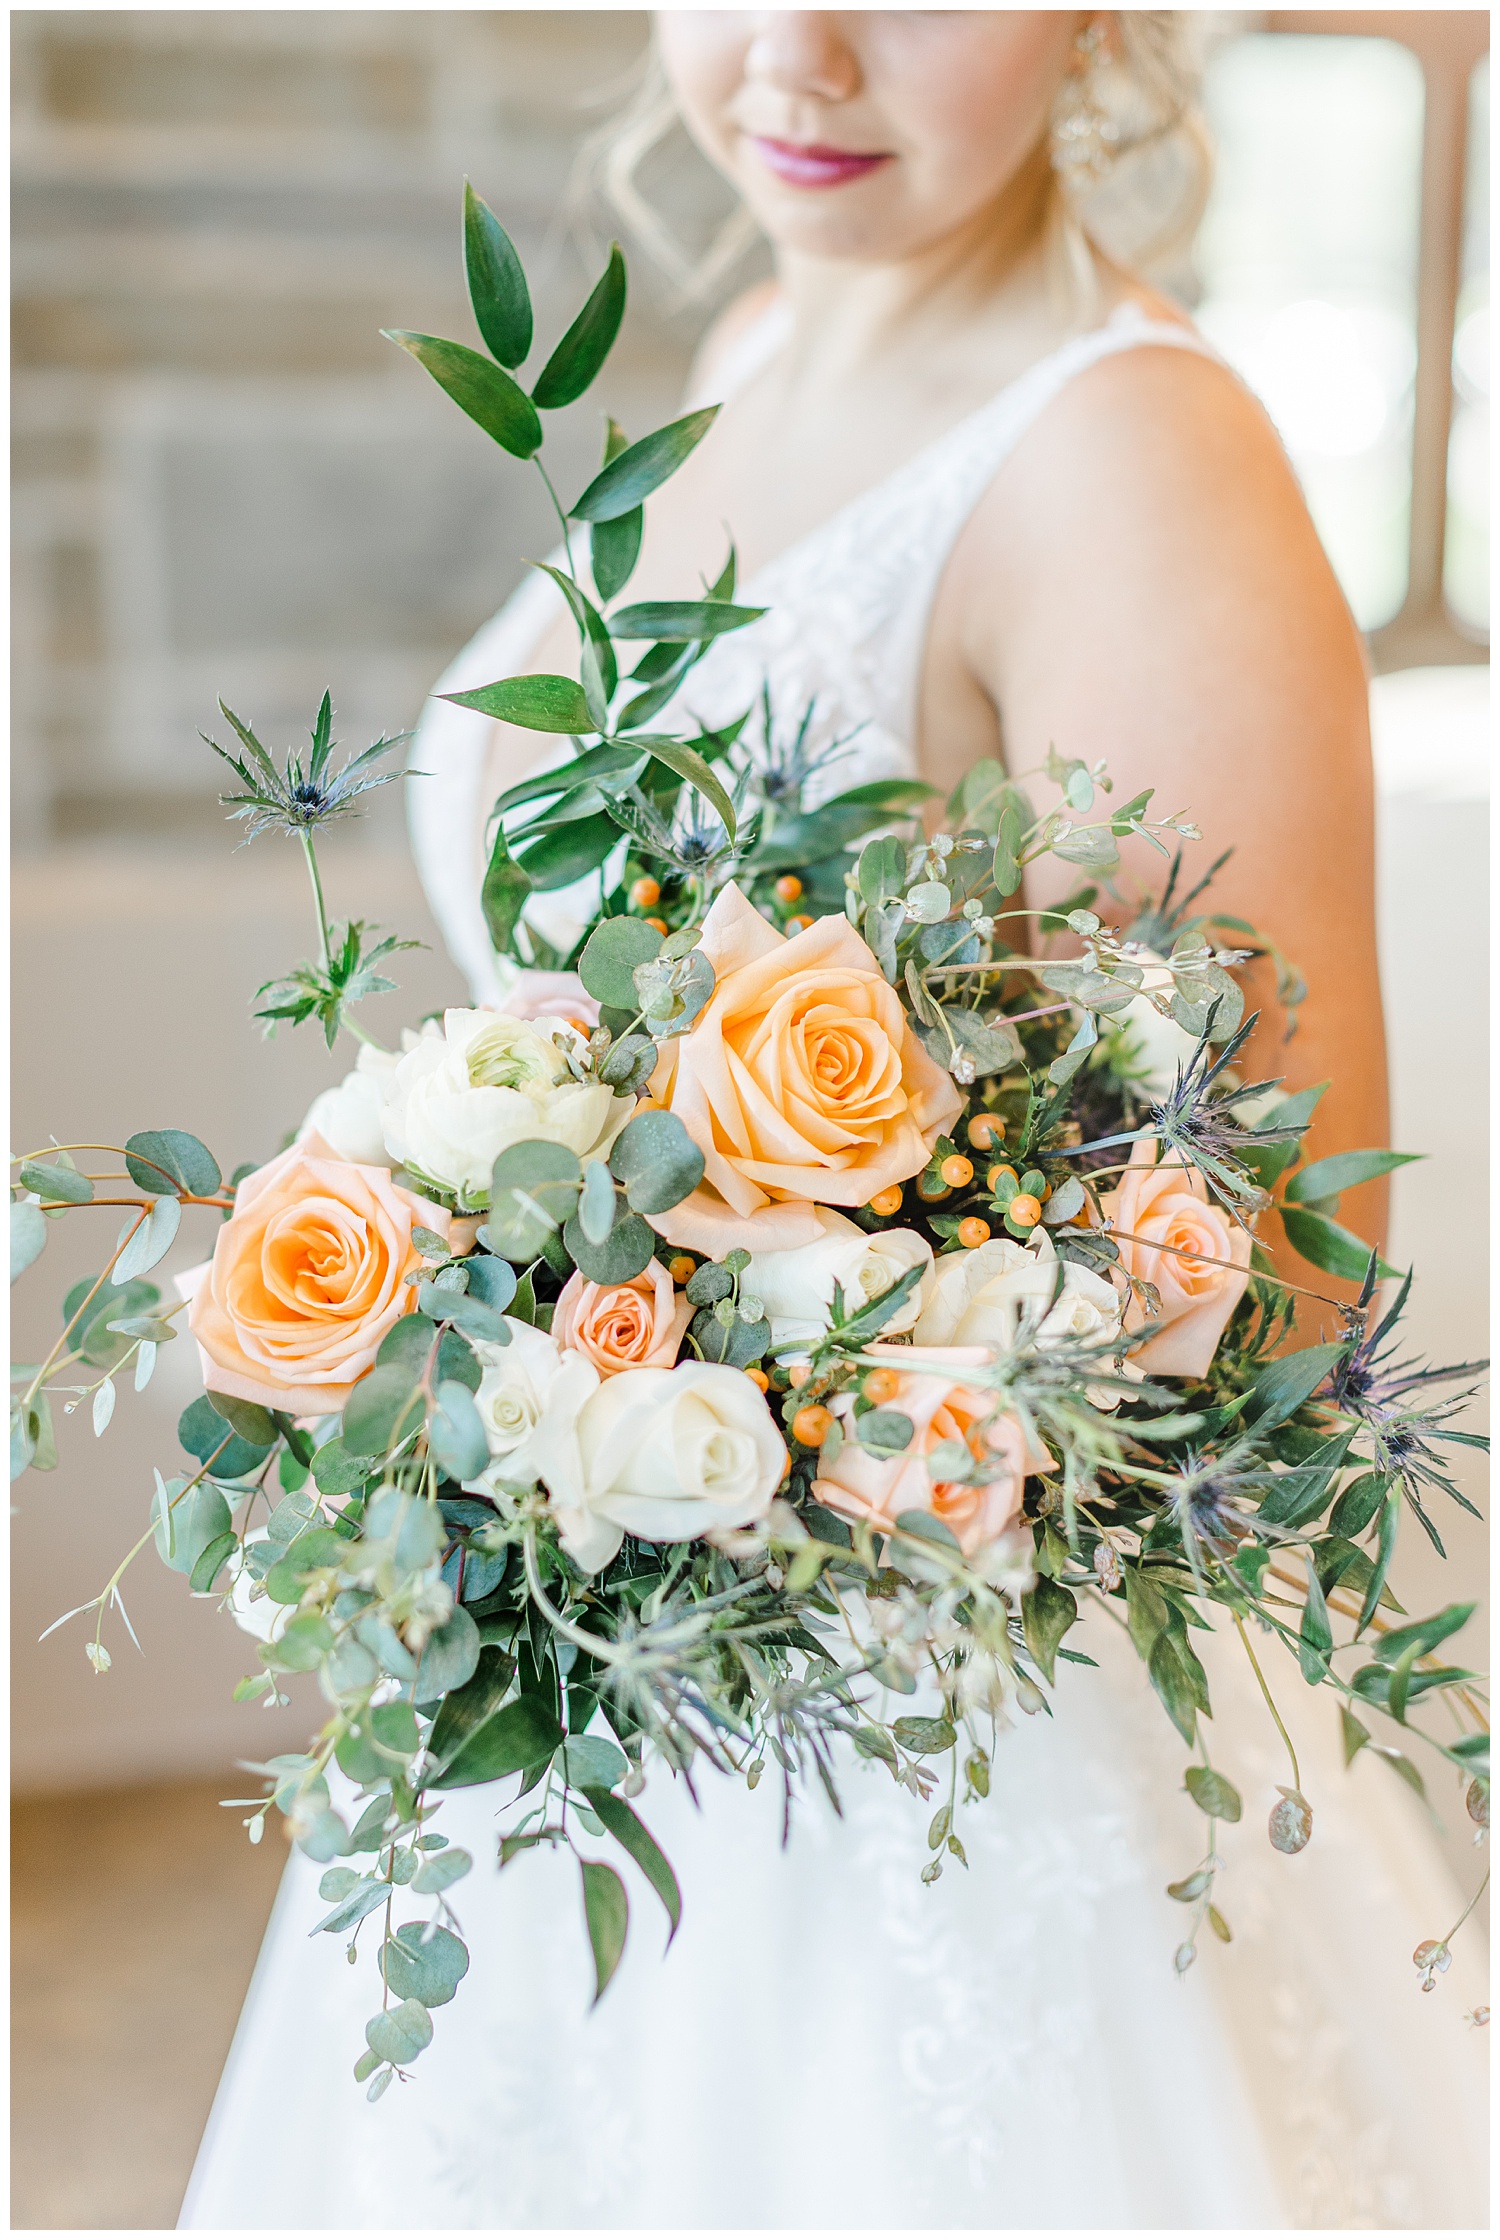 Peach and white rose wedding bouquet with white ranunculus and eucalyptus | CB Studio